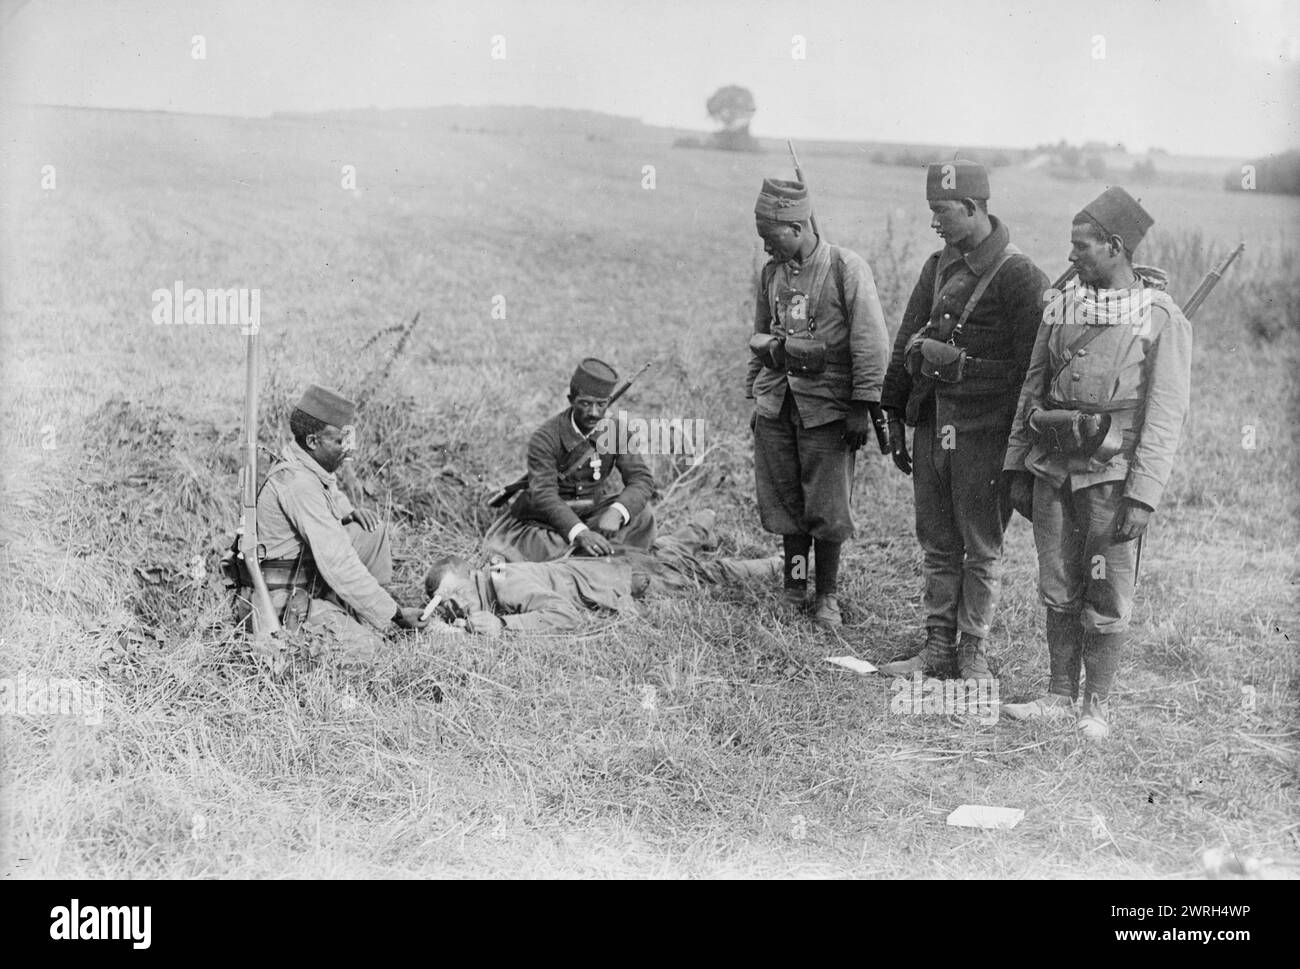 French succoring wounded German, 1914. French Moroccan soldiers, between Villeroy and Neufmoutiers, France, caring for a wounded German soldier during World War I. Stock Photo